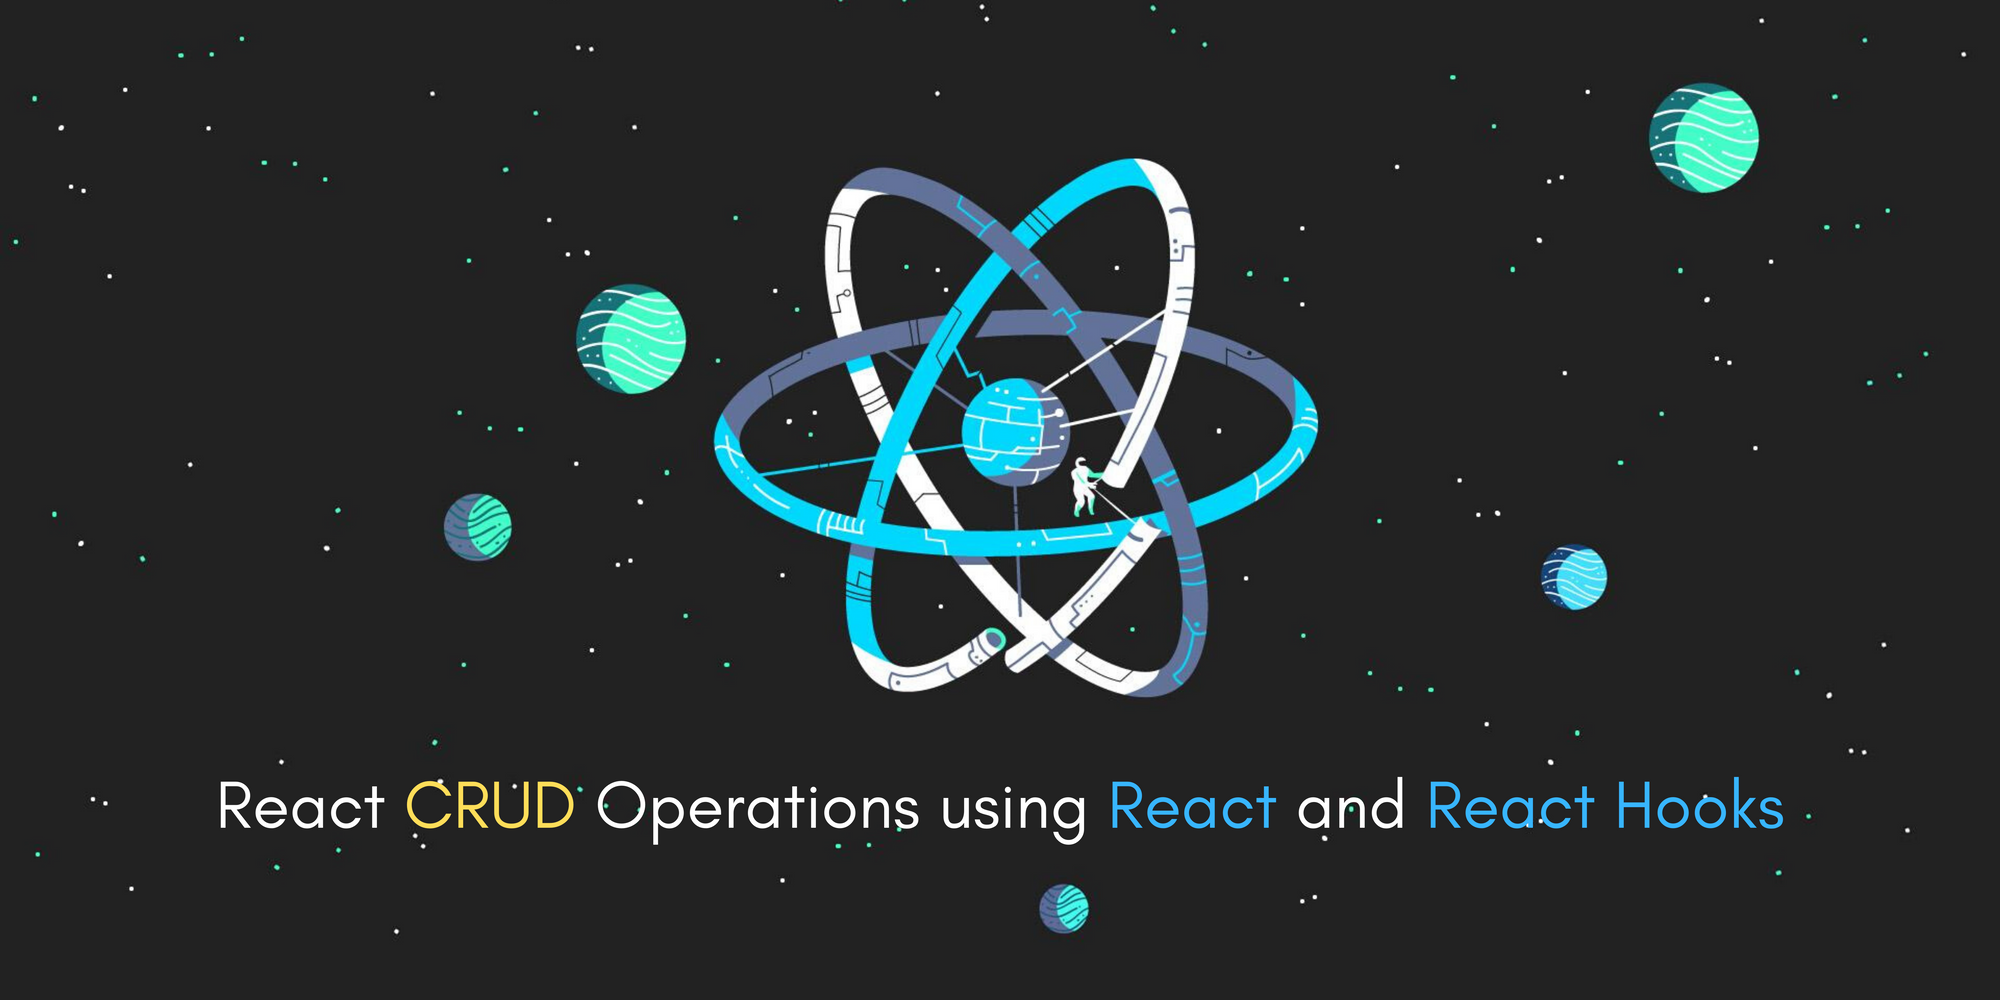 How to Perform CRUD Operations using React, React Hooks, and Axios